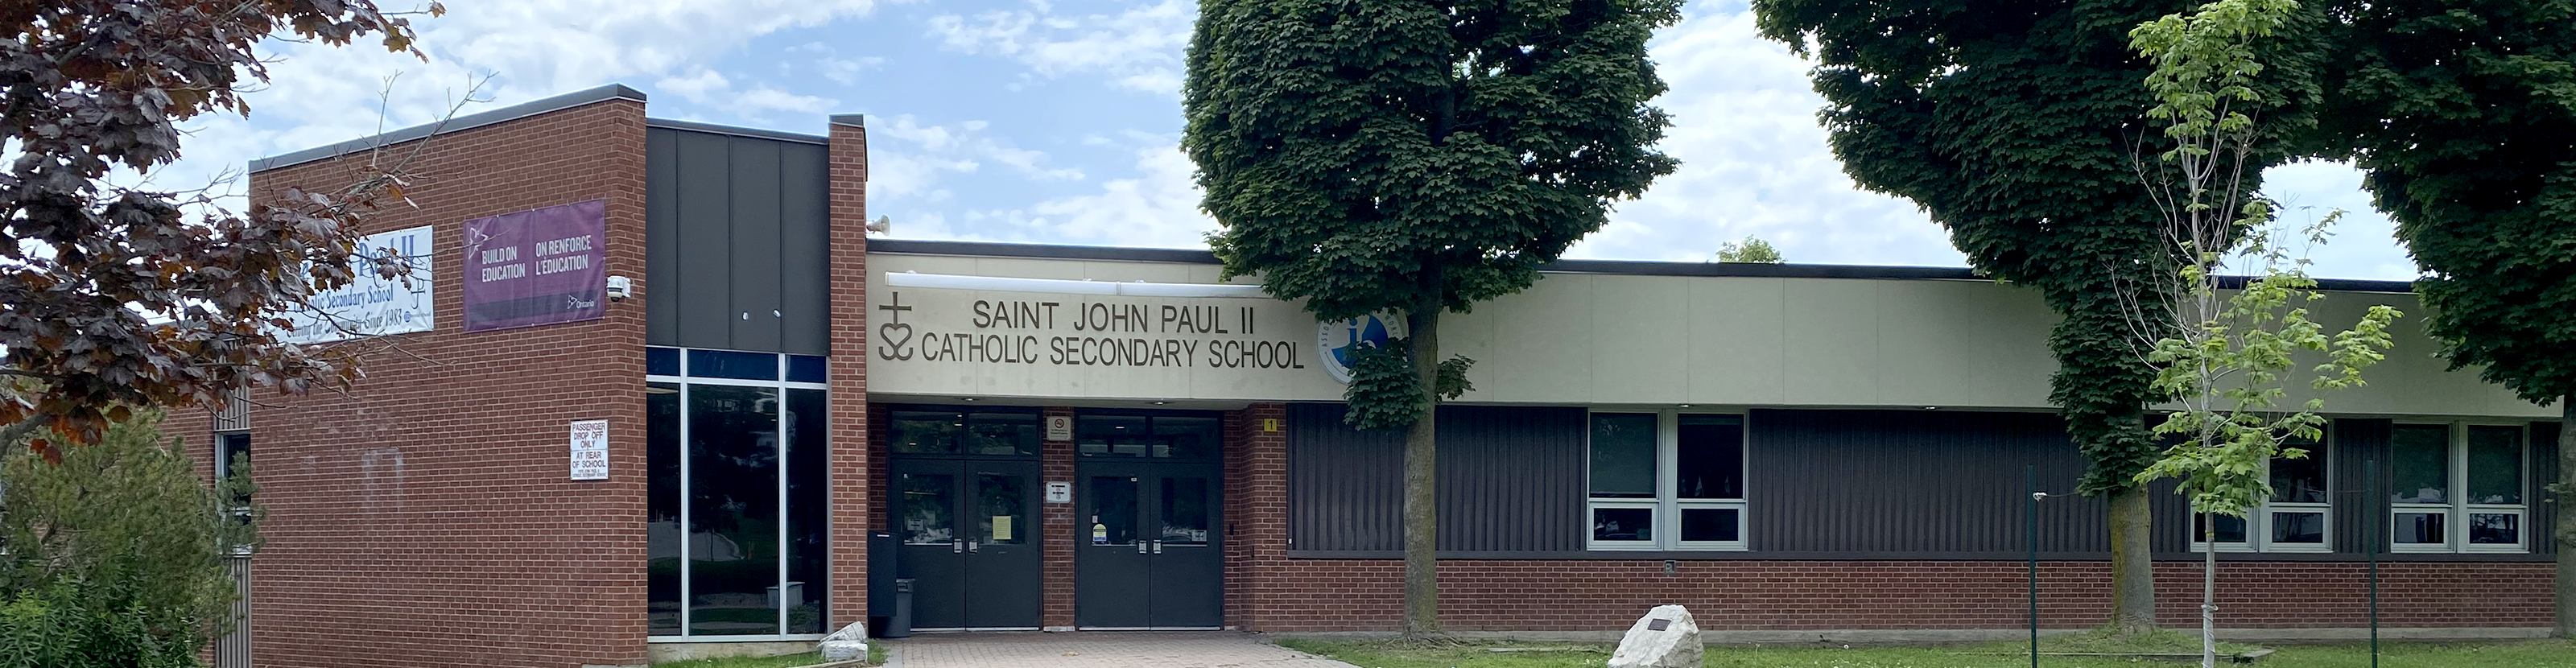 The front of the St. John Paul II Catholic Secondary School building.